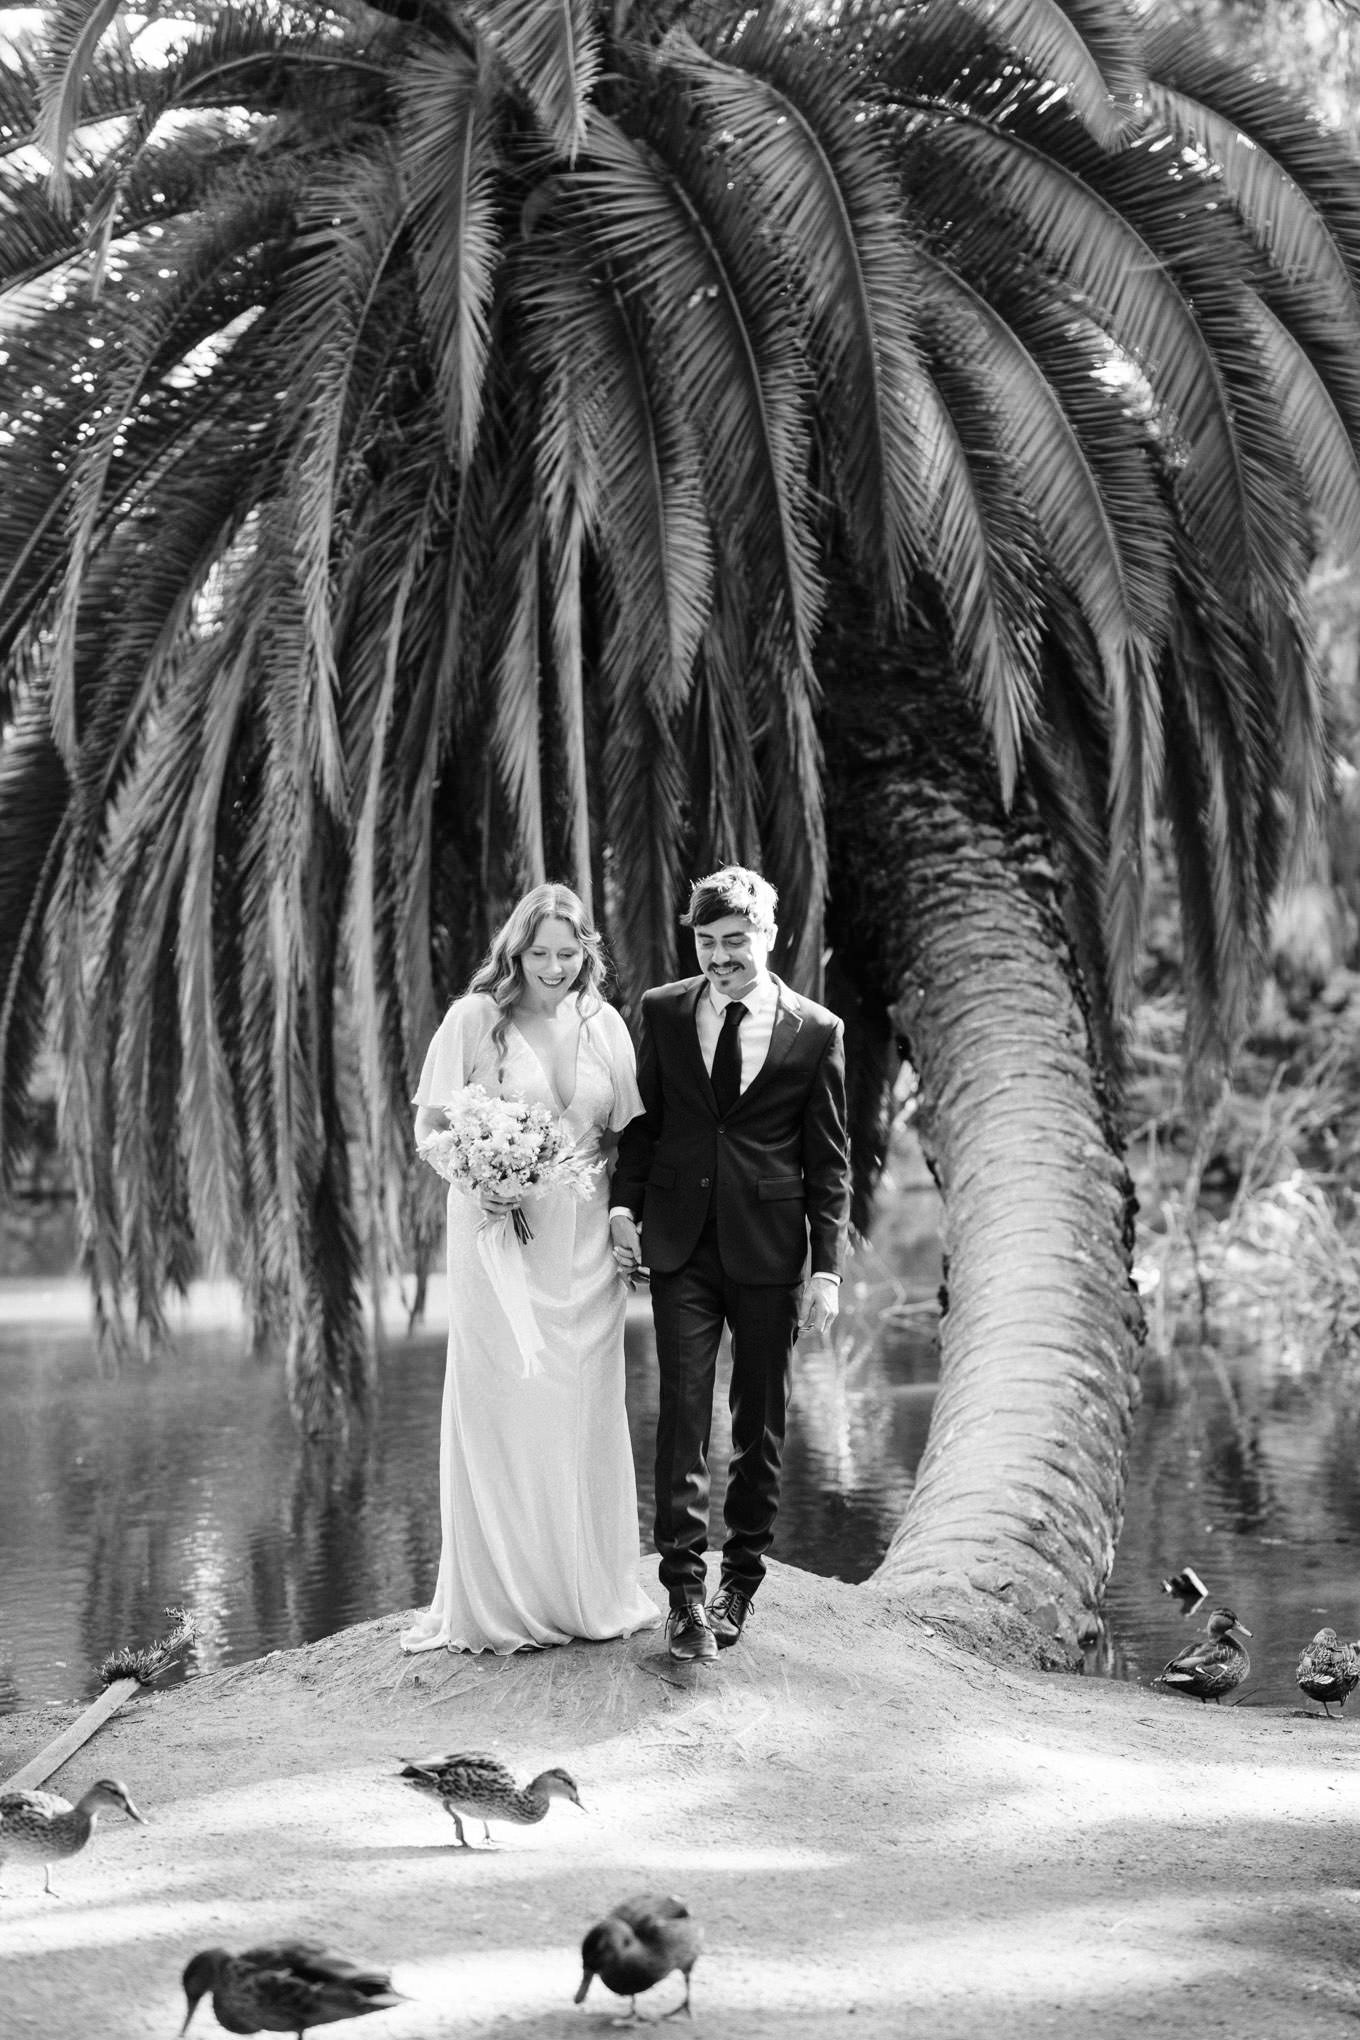 Bride and groom walking with ducks | Los Angeles Arboretum Elopement | Colorful and elevated wedding photography for fun-loving couples in Southern California | #LosAngelesElopement #elopement #LAarboretum #LAskyline #elopementphotos   Source: Mary Costa Photography | Los Angeles